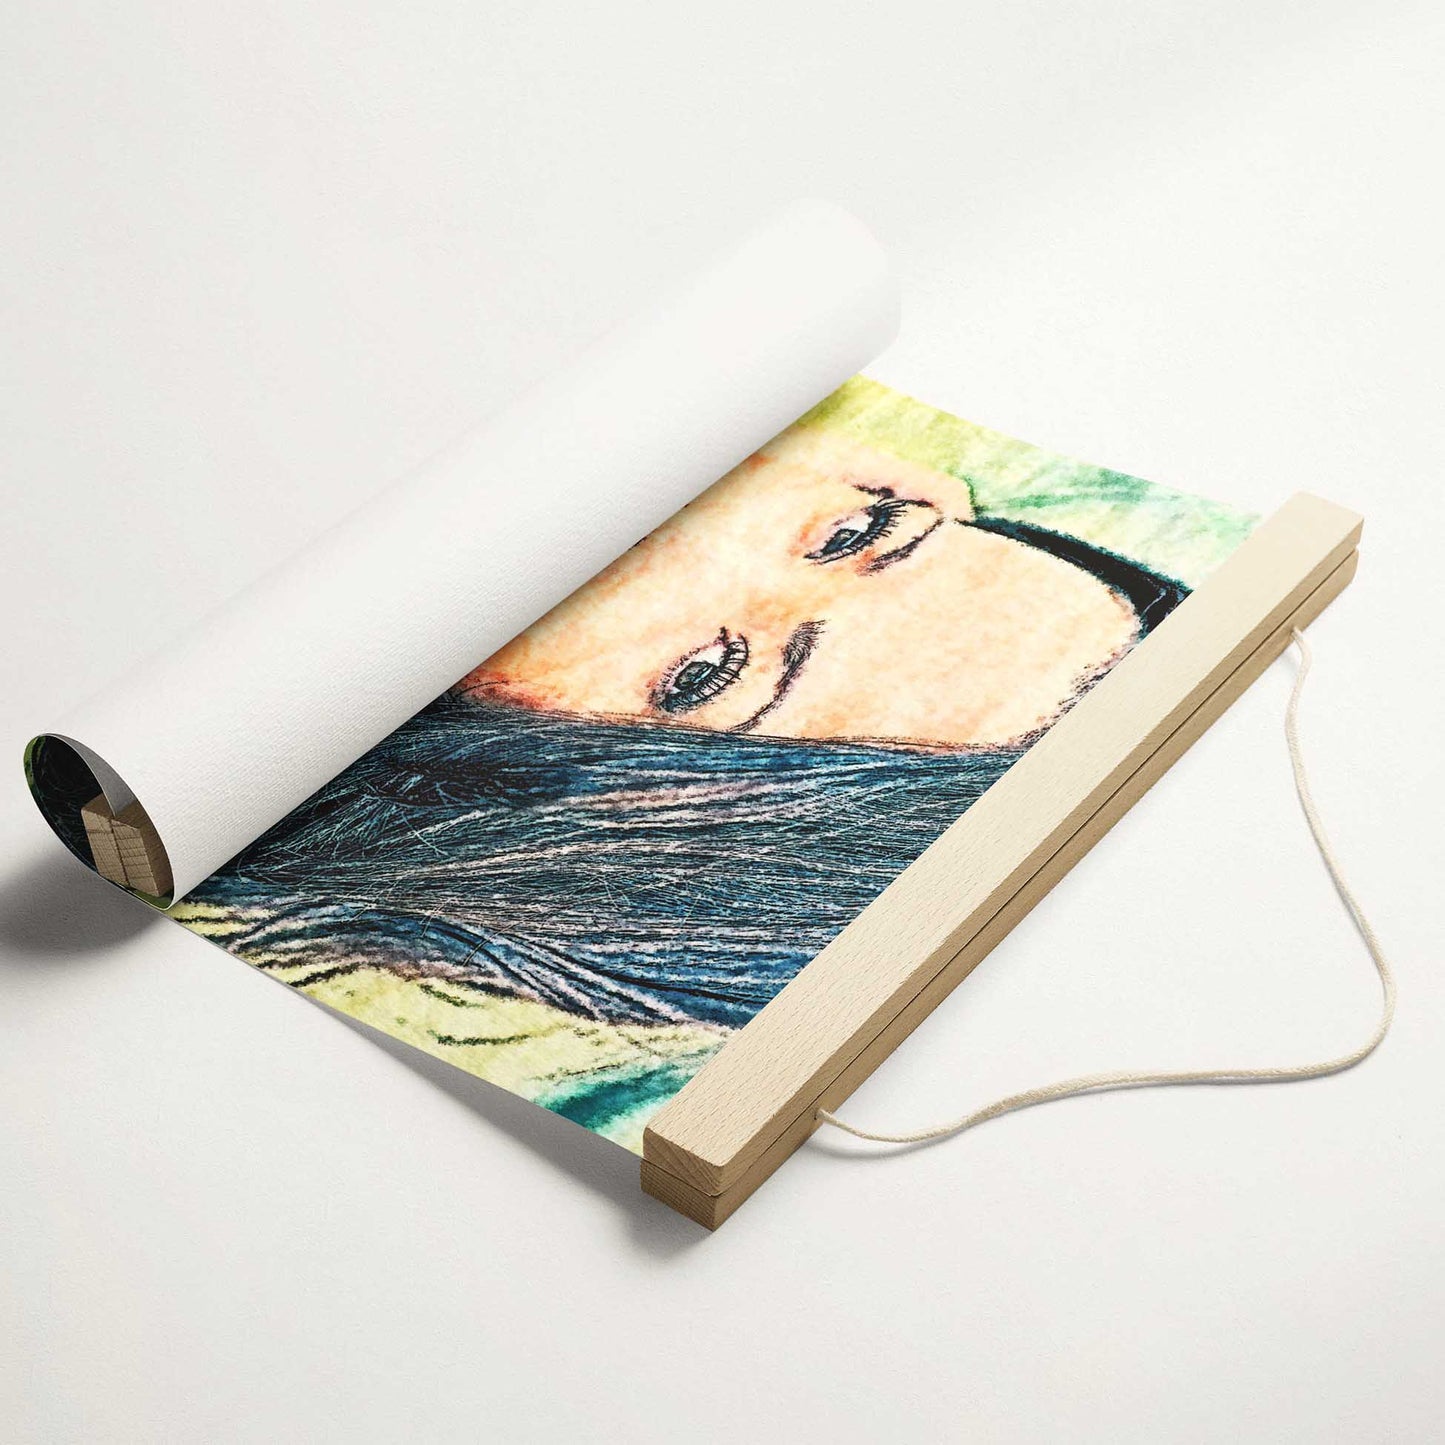 Transform your walls into an art gallery with our Personalised Watercolor Painting Poster Hanger. This stunning piece captures the beauty of watercolour art with its vibrant colors and traditional effect. Created from your own photo